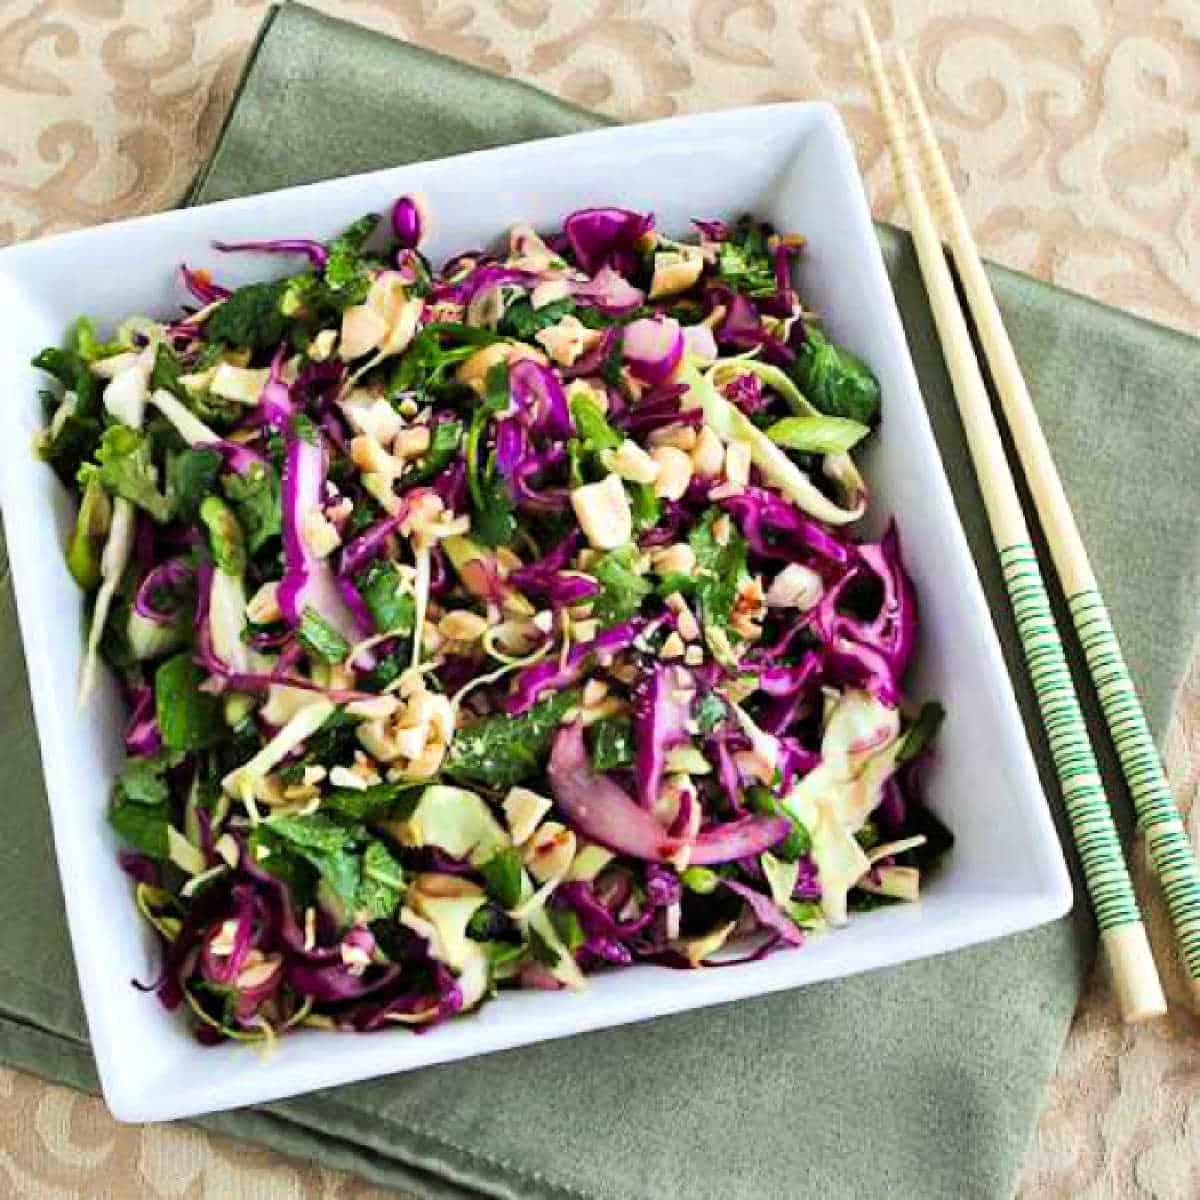 Square image of Thai Cabbage Salad in bowl with chopsticks.